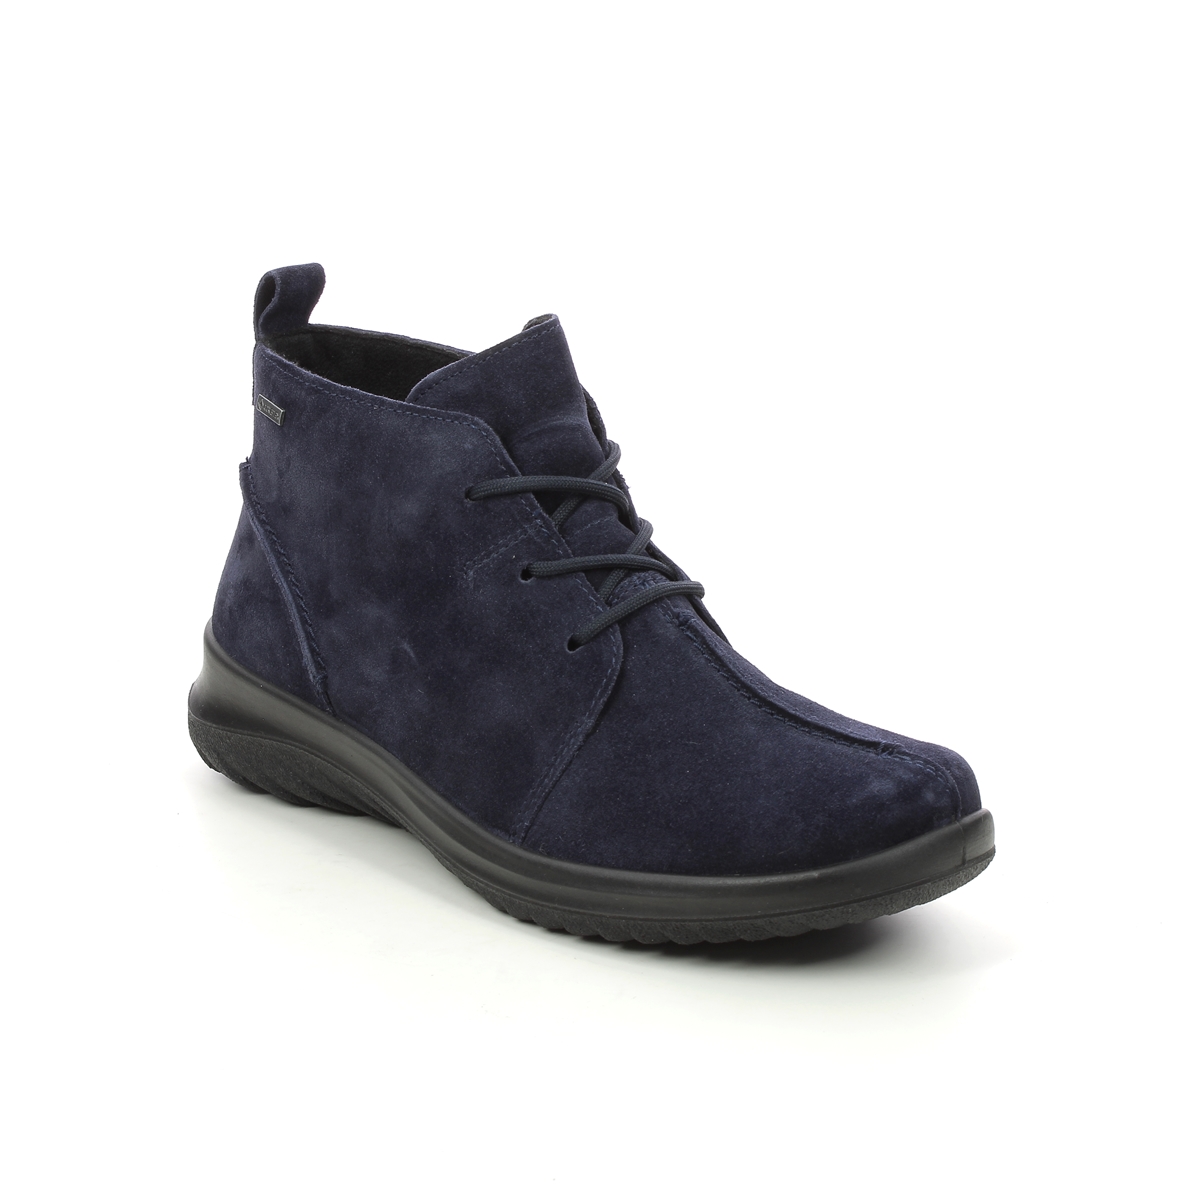 Legero Soft Lace Gtx Navy Suede Womens Lace Up Boots 2009569-8300 In Size 7 In Plain Navy Suede